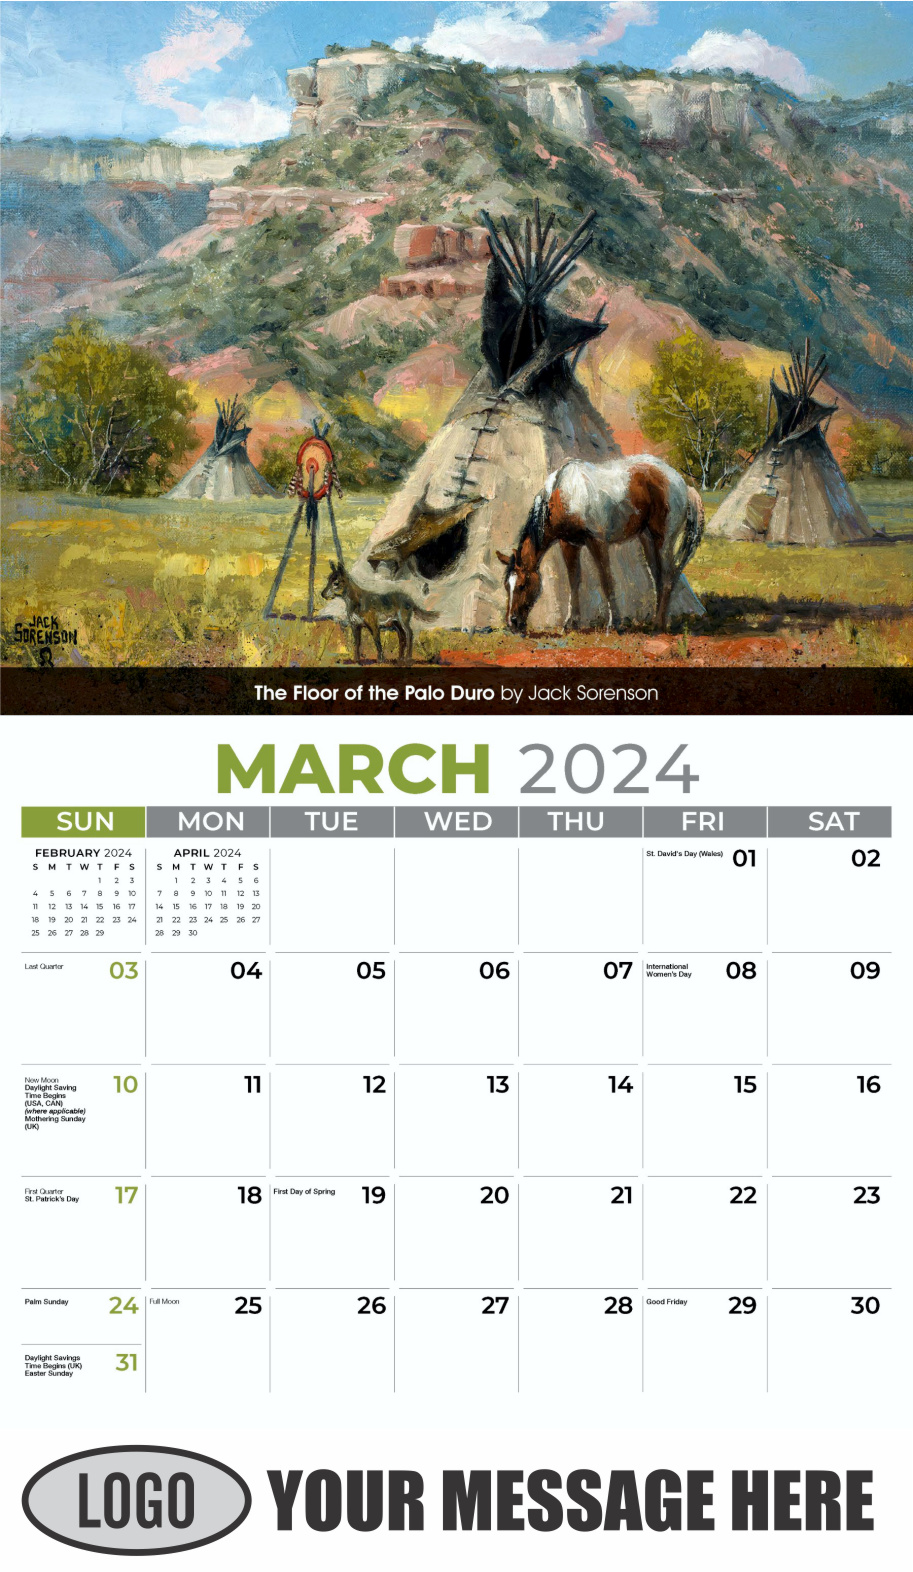 Spirit of the Old West 2024 Old West Art Business Promo Wall Calendar - March